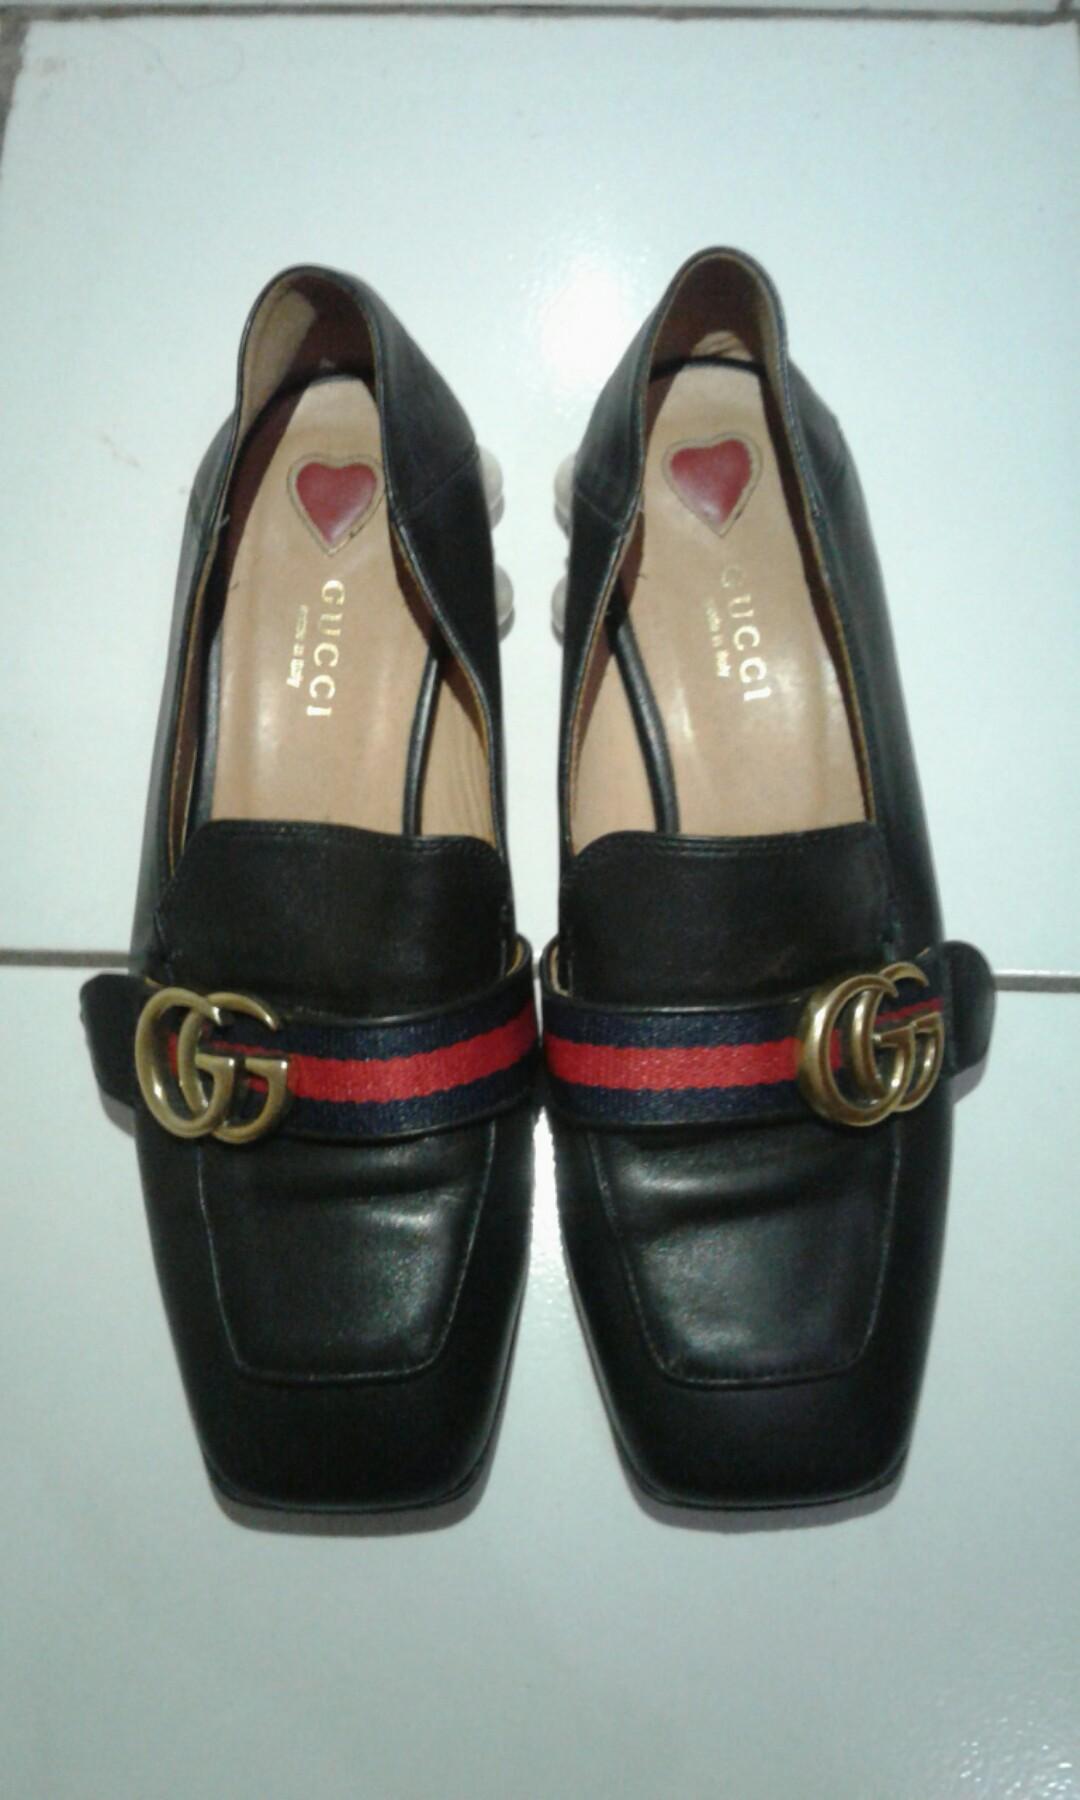 gucci mid heel loafer